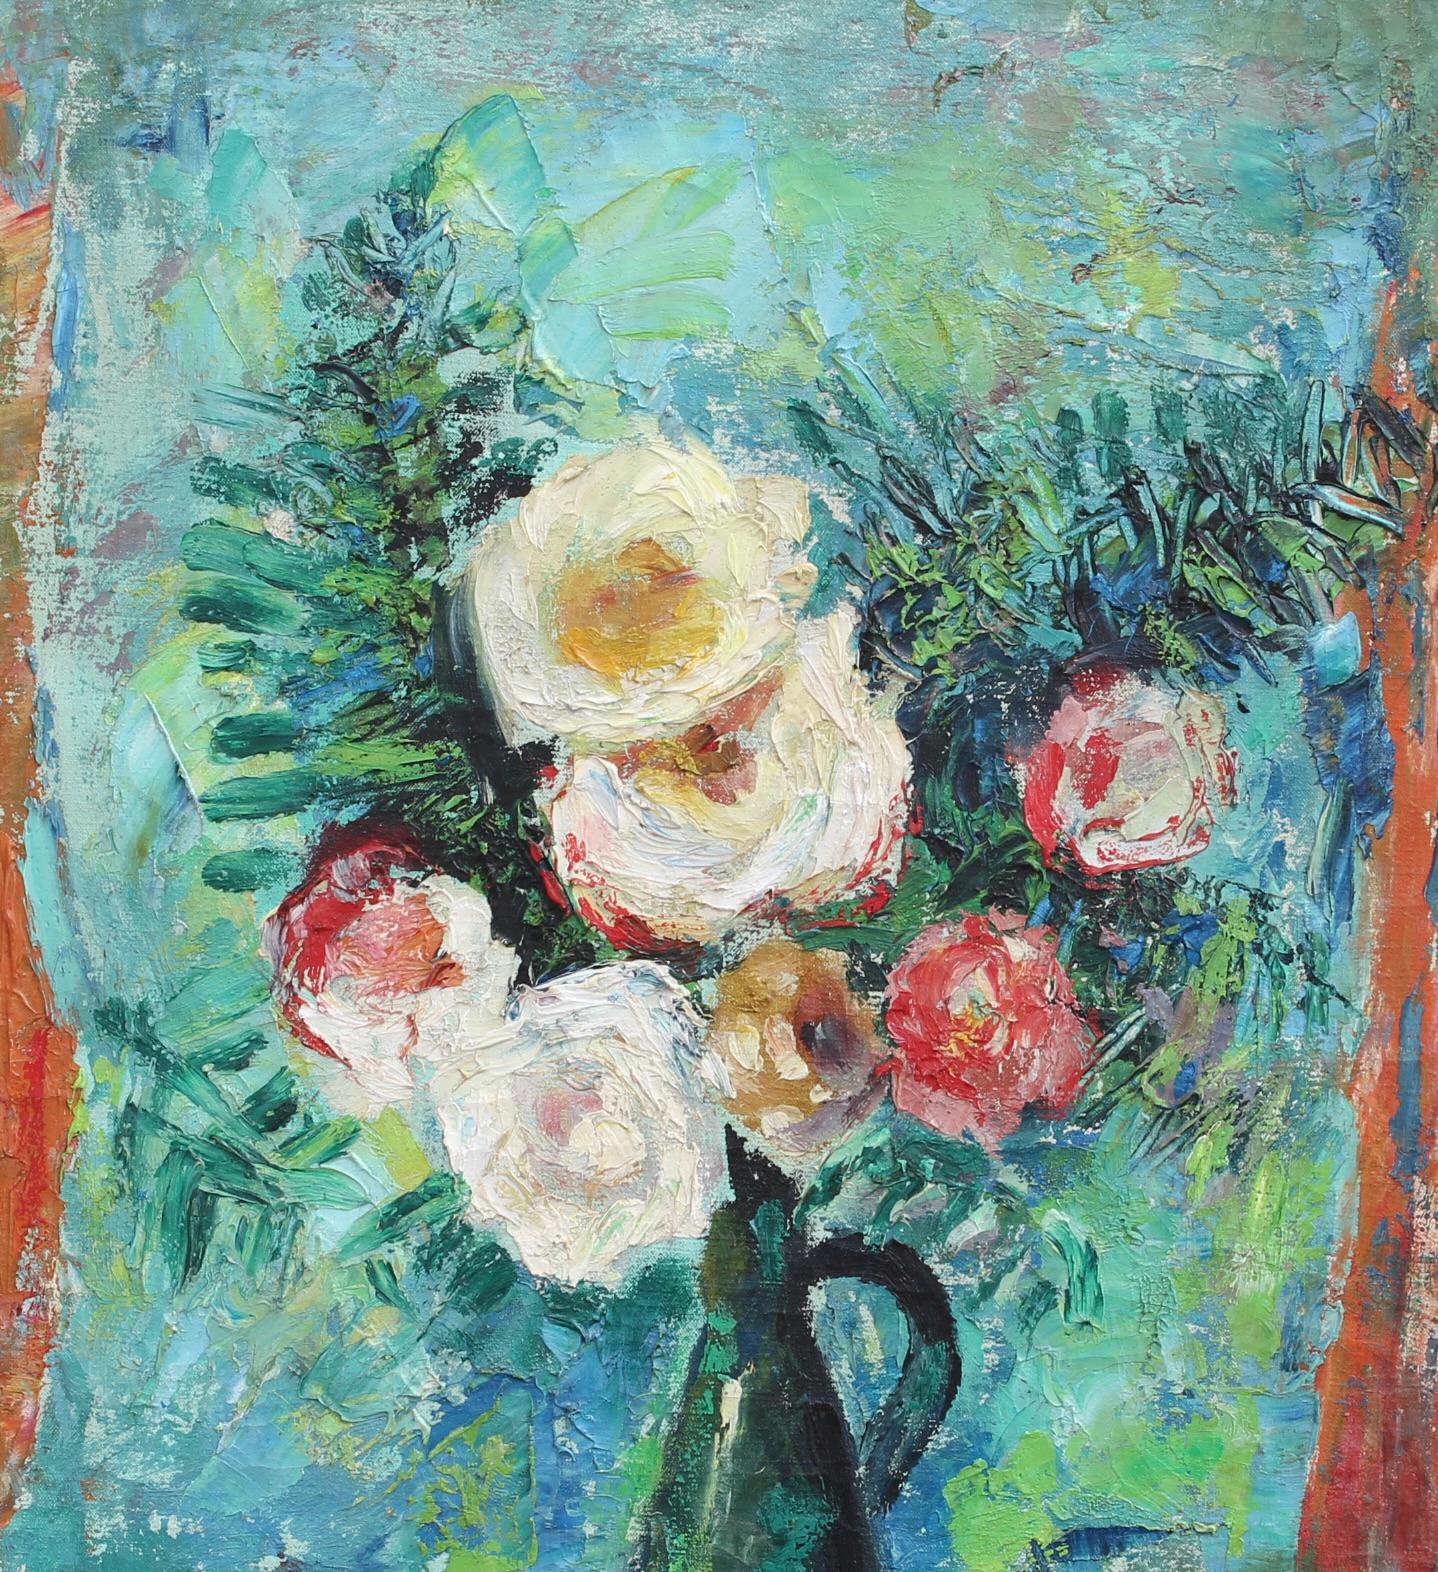 'Bouquet of Flowers in a Pitcher', oil on canvas, by Lilian Whitteker (circa 1960s). This Impressionist bouquet of mixed flowers is a swirl of colour, elegantly posed in a green glass pitcher with a large ear-shaped handle. Next to the bouquet is a